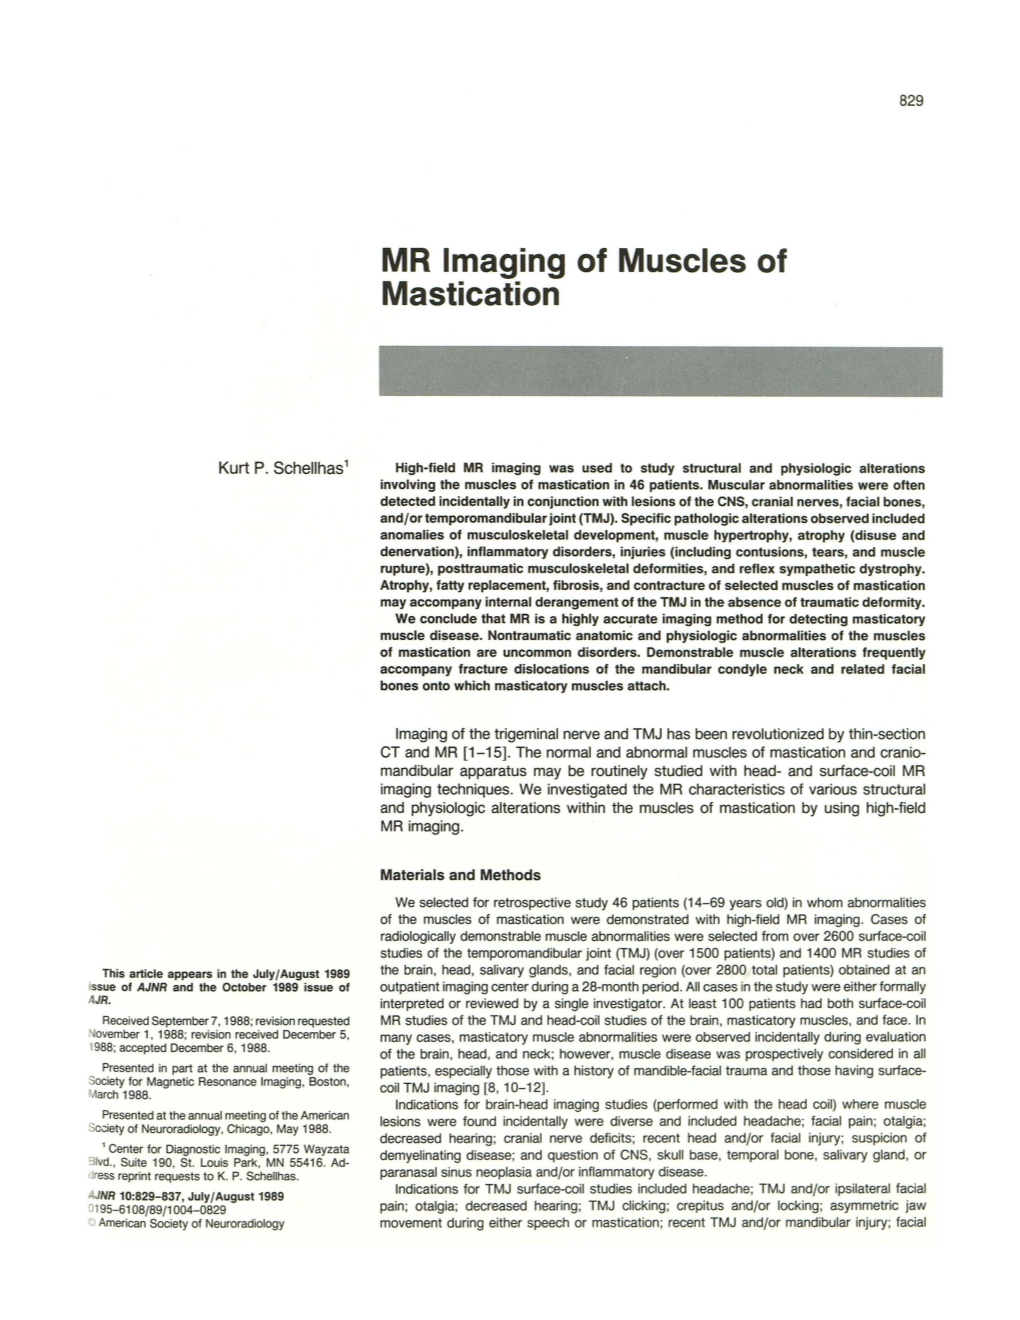 MR Imaging of Muscles of Mastication